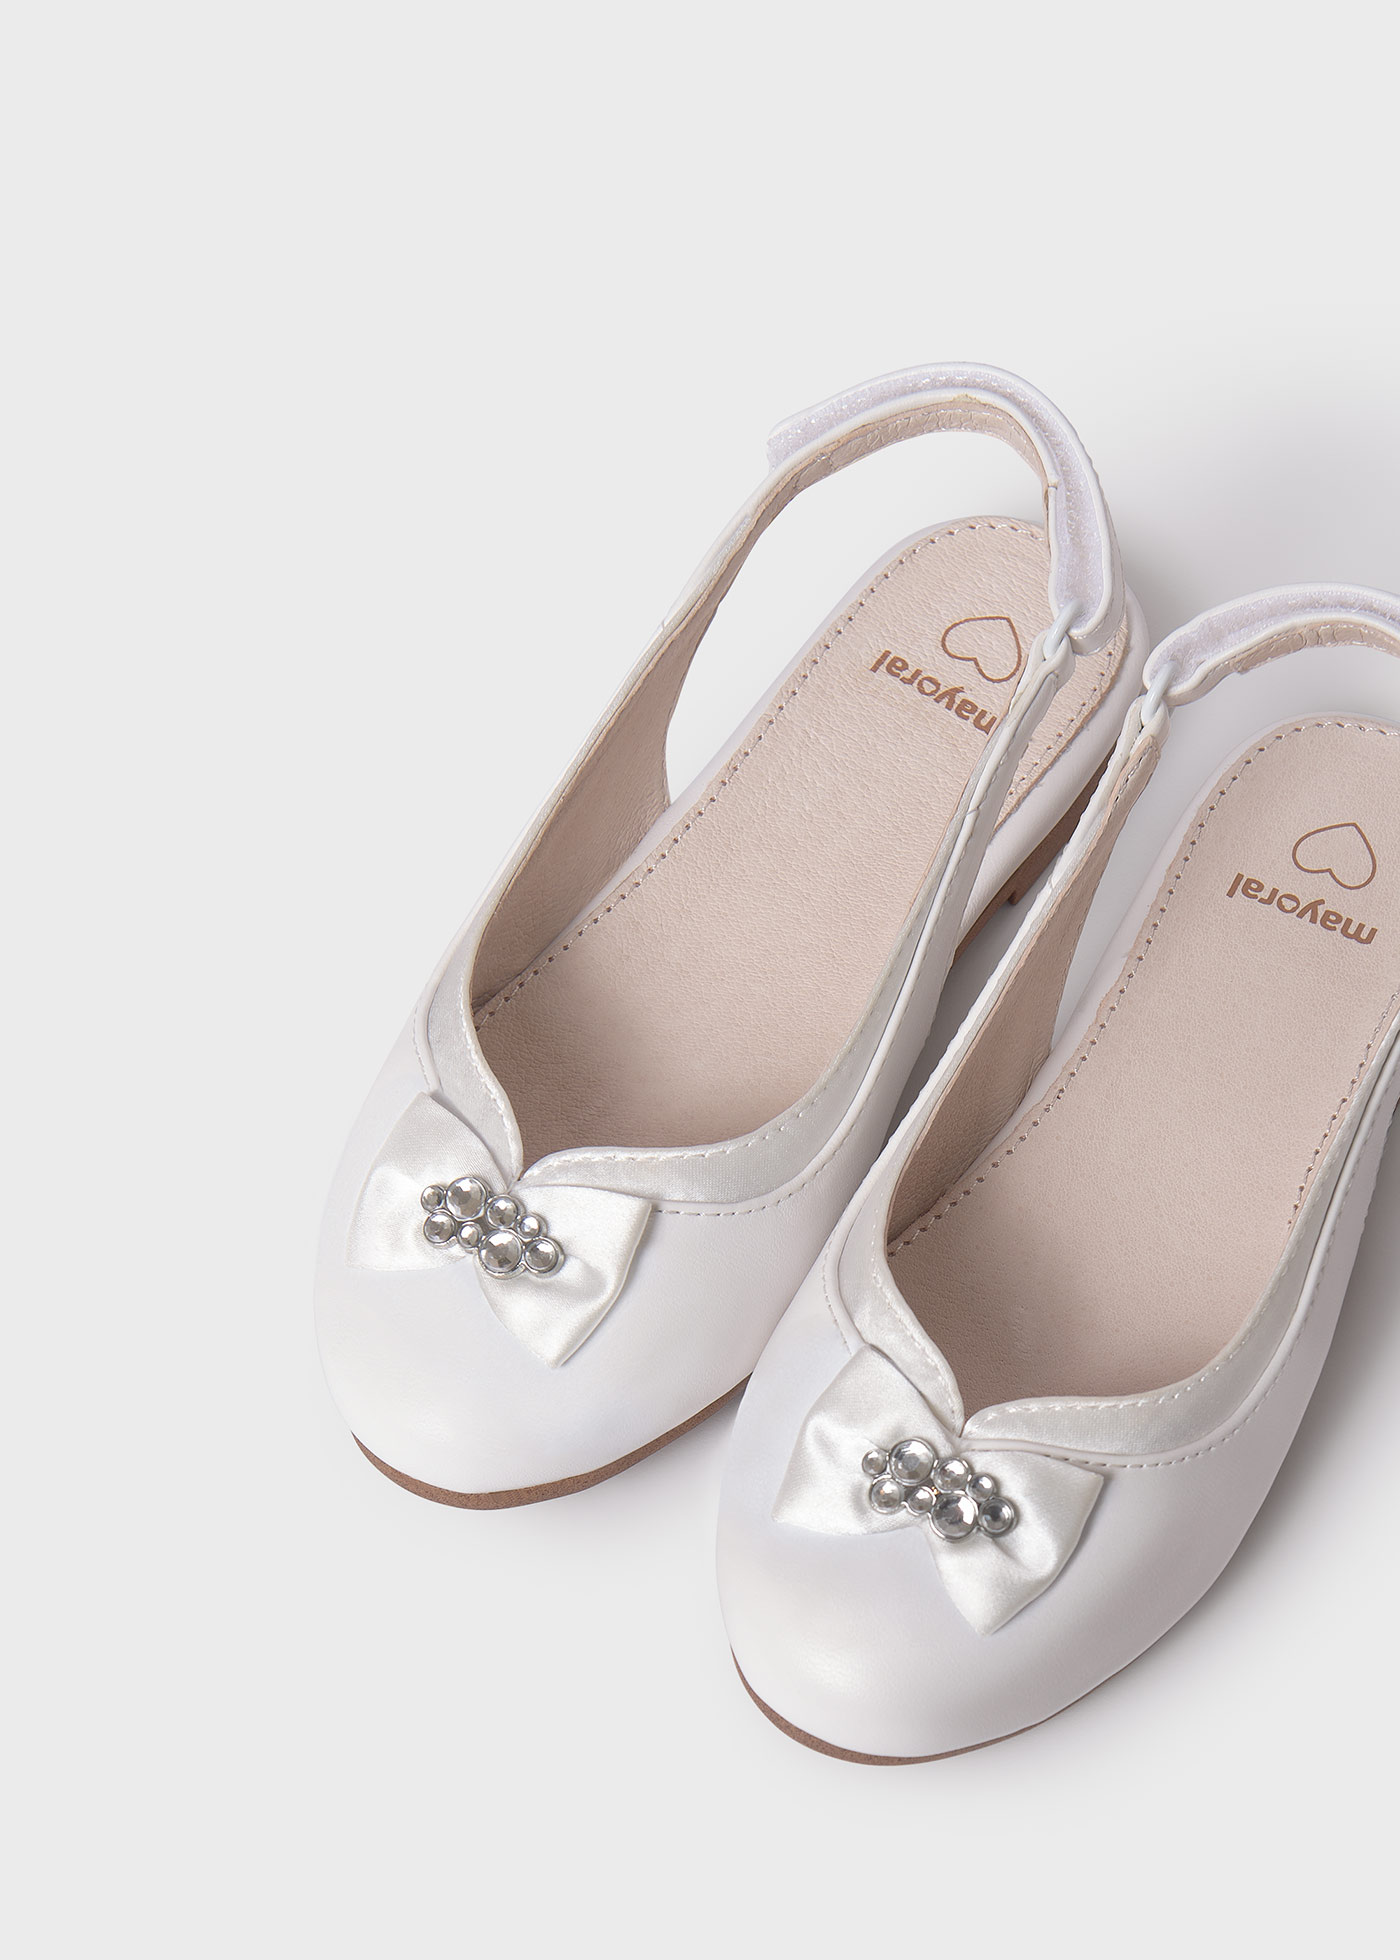 Girls ballet flat sustainable leather